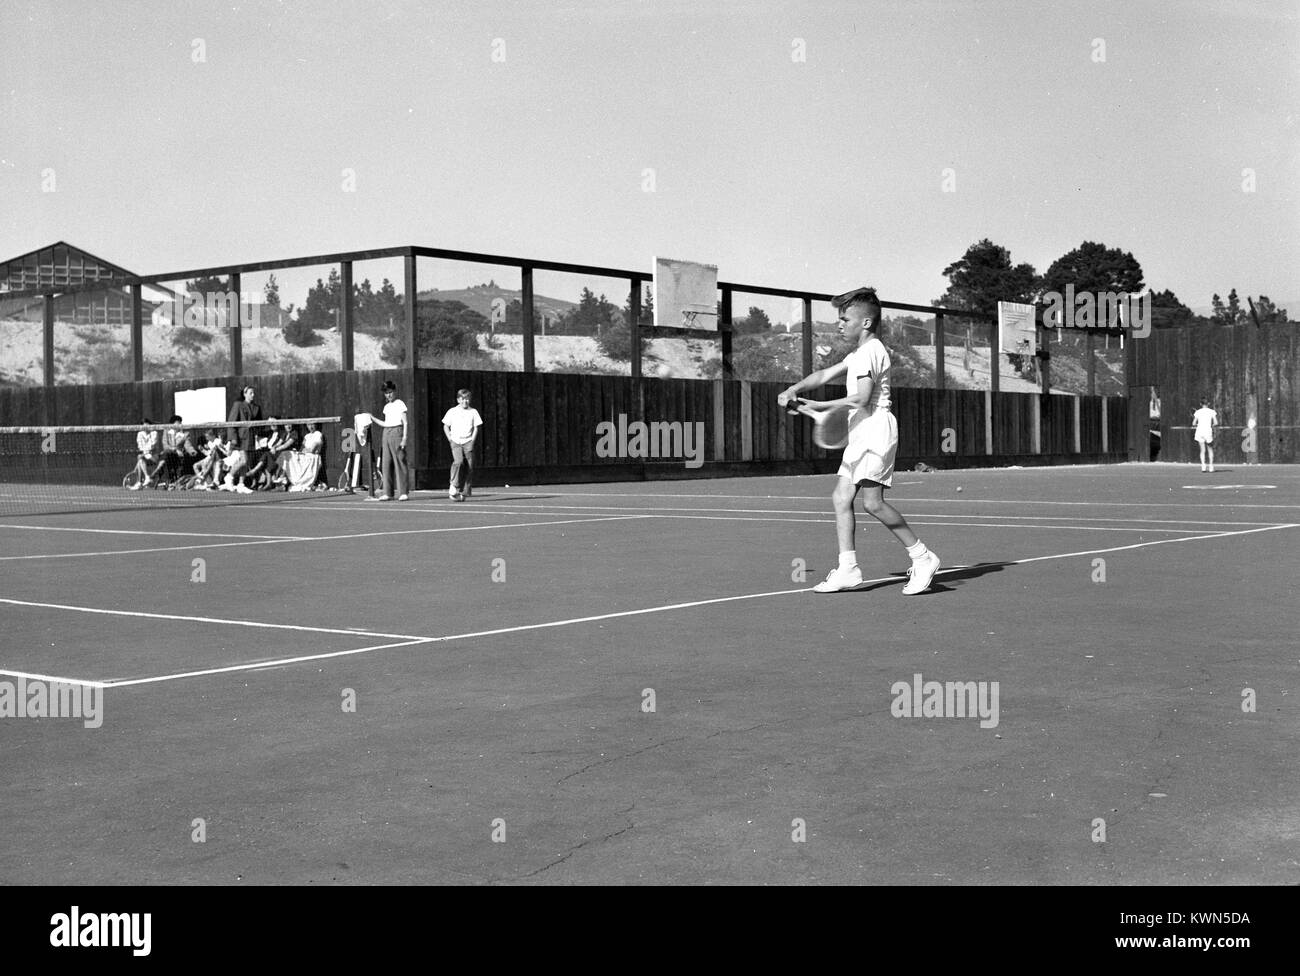 A young boy lines up a shot while playing tennis, as a group of his peers look on, Monterey, California, 1950. Stock Photo